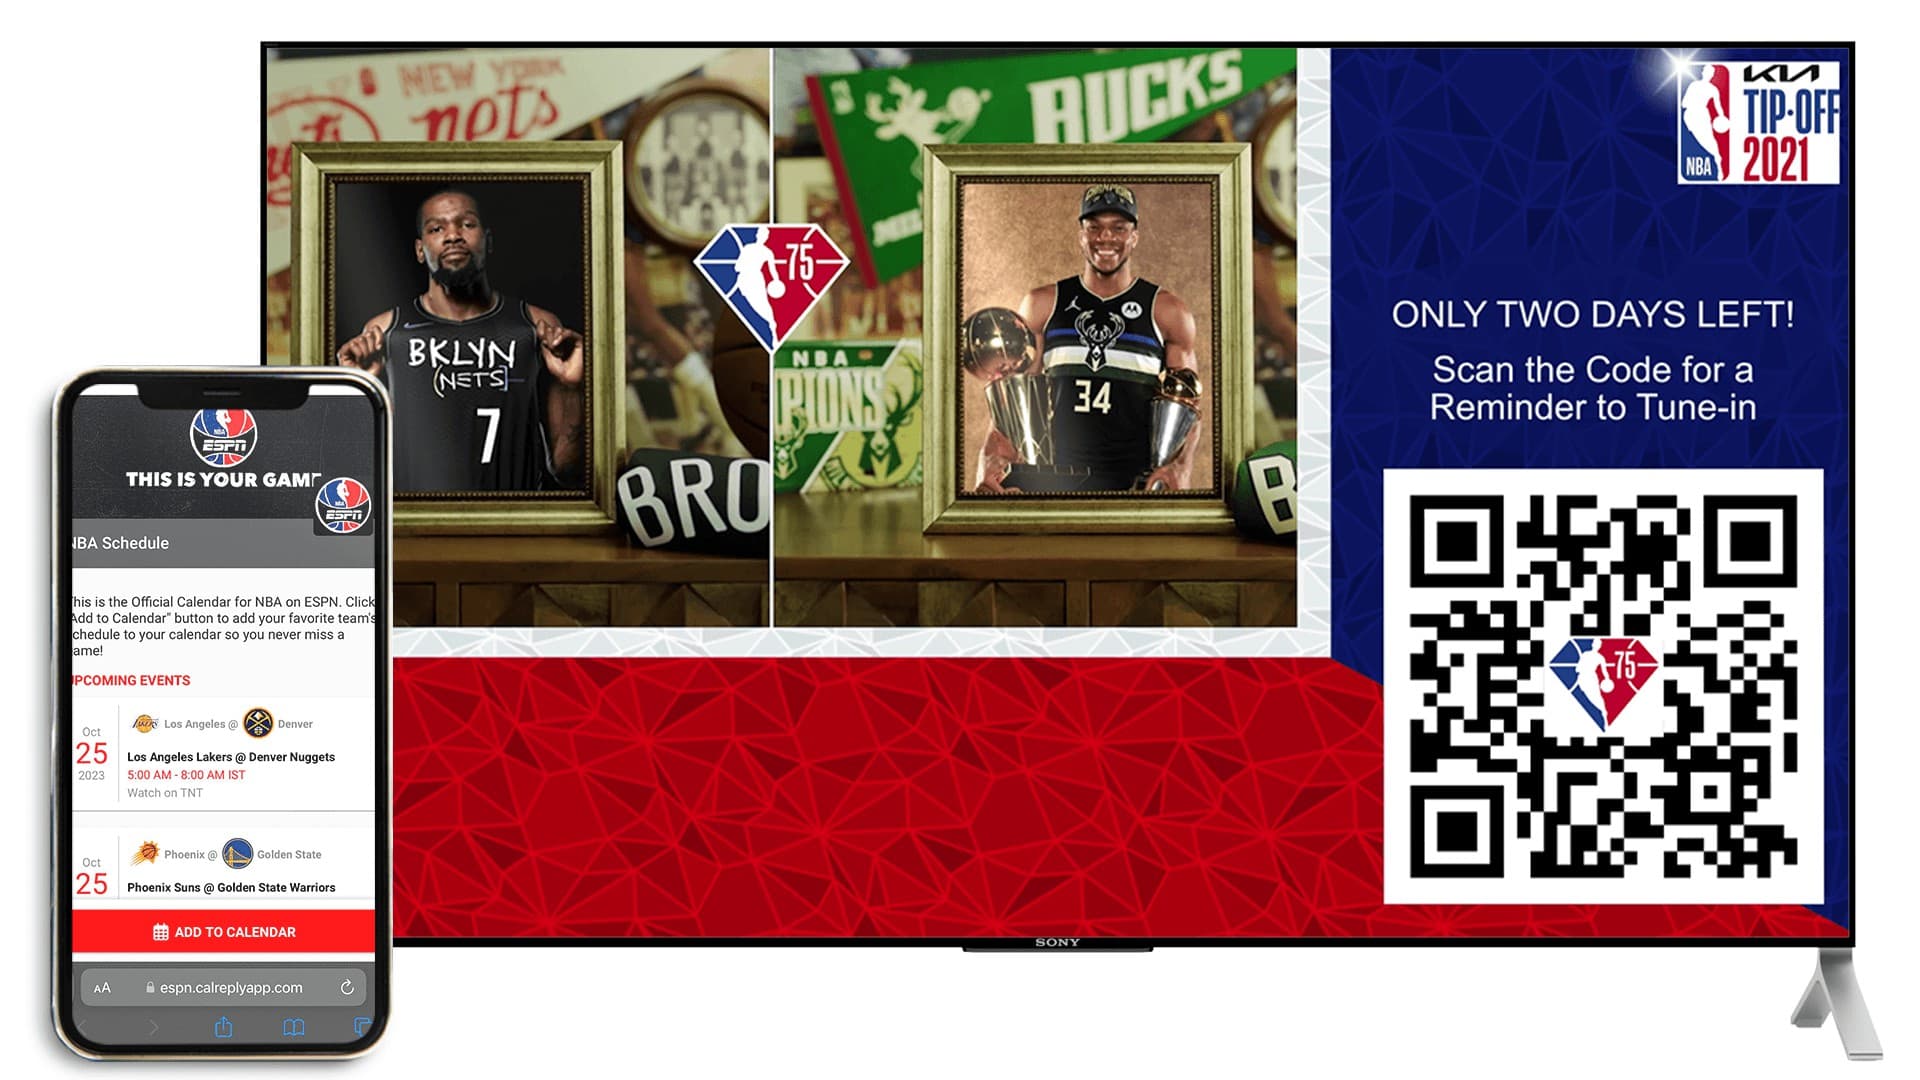 NBA Leveraged VDO.AI’s Dynamic CTV QR Codes To Generate High Engagement Rates And 100% On Target Delivery